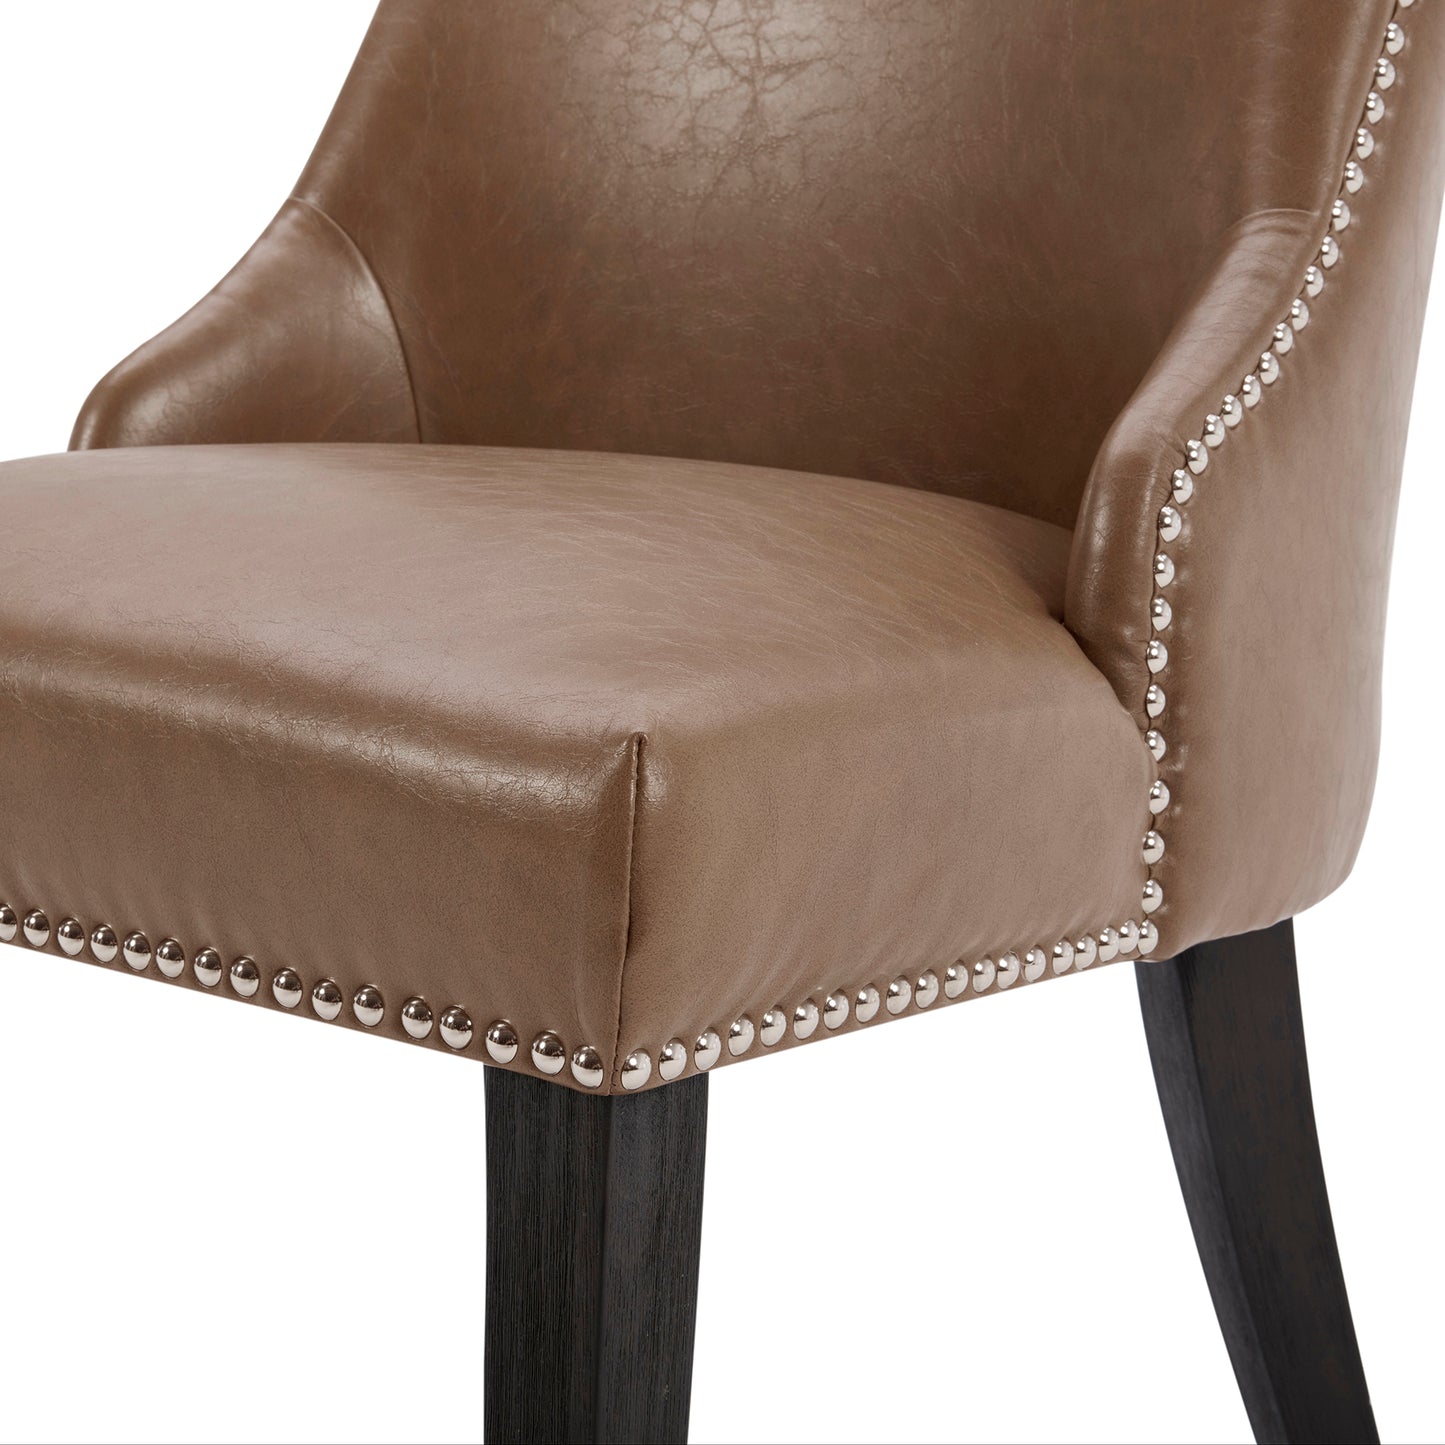 Asher Upholstered Dining Chair with Nailhead Trim (Set of 2)